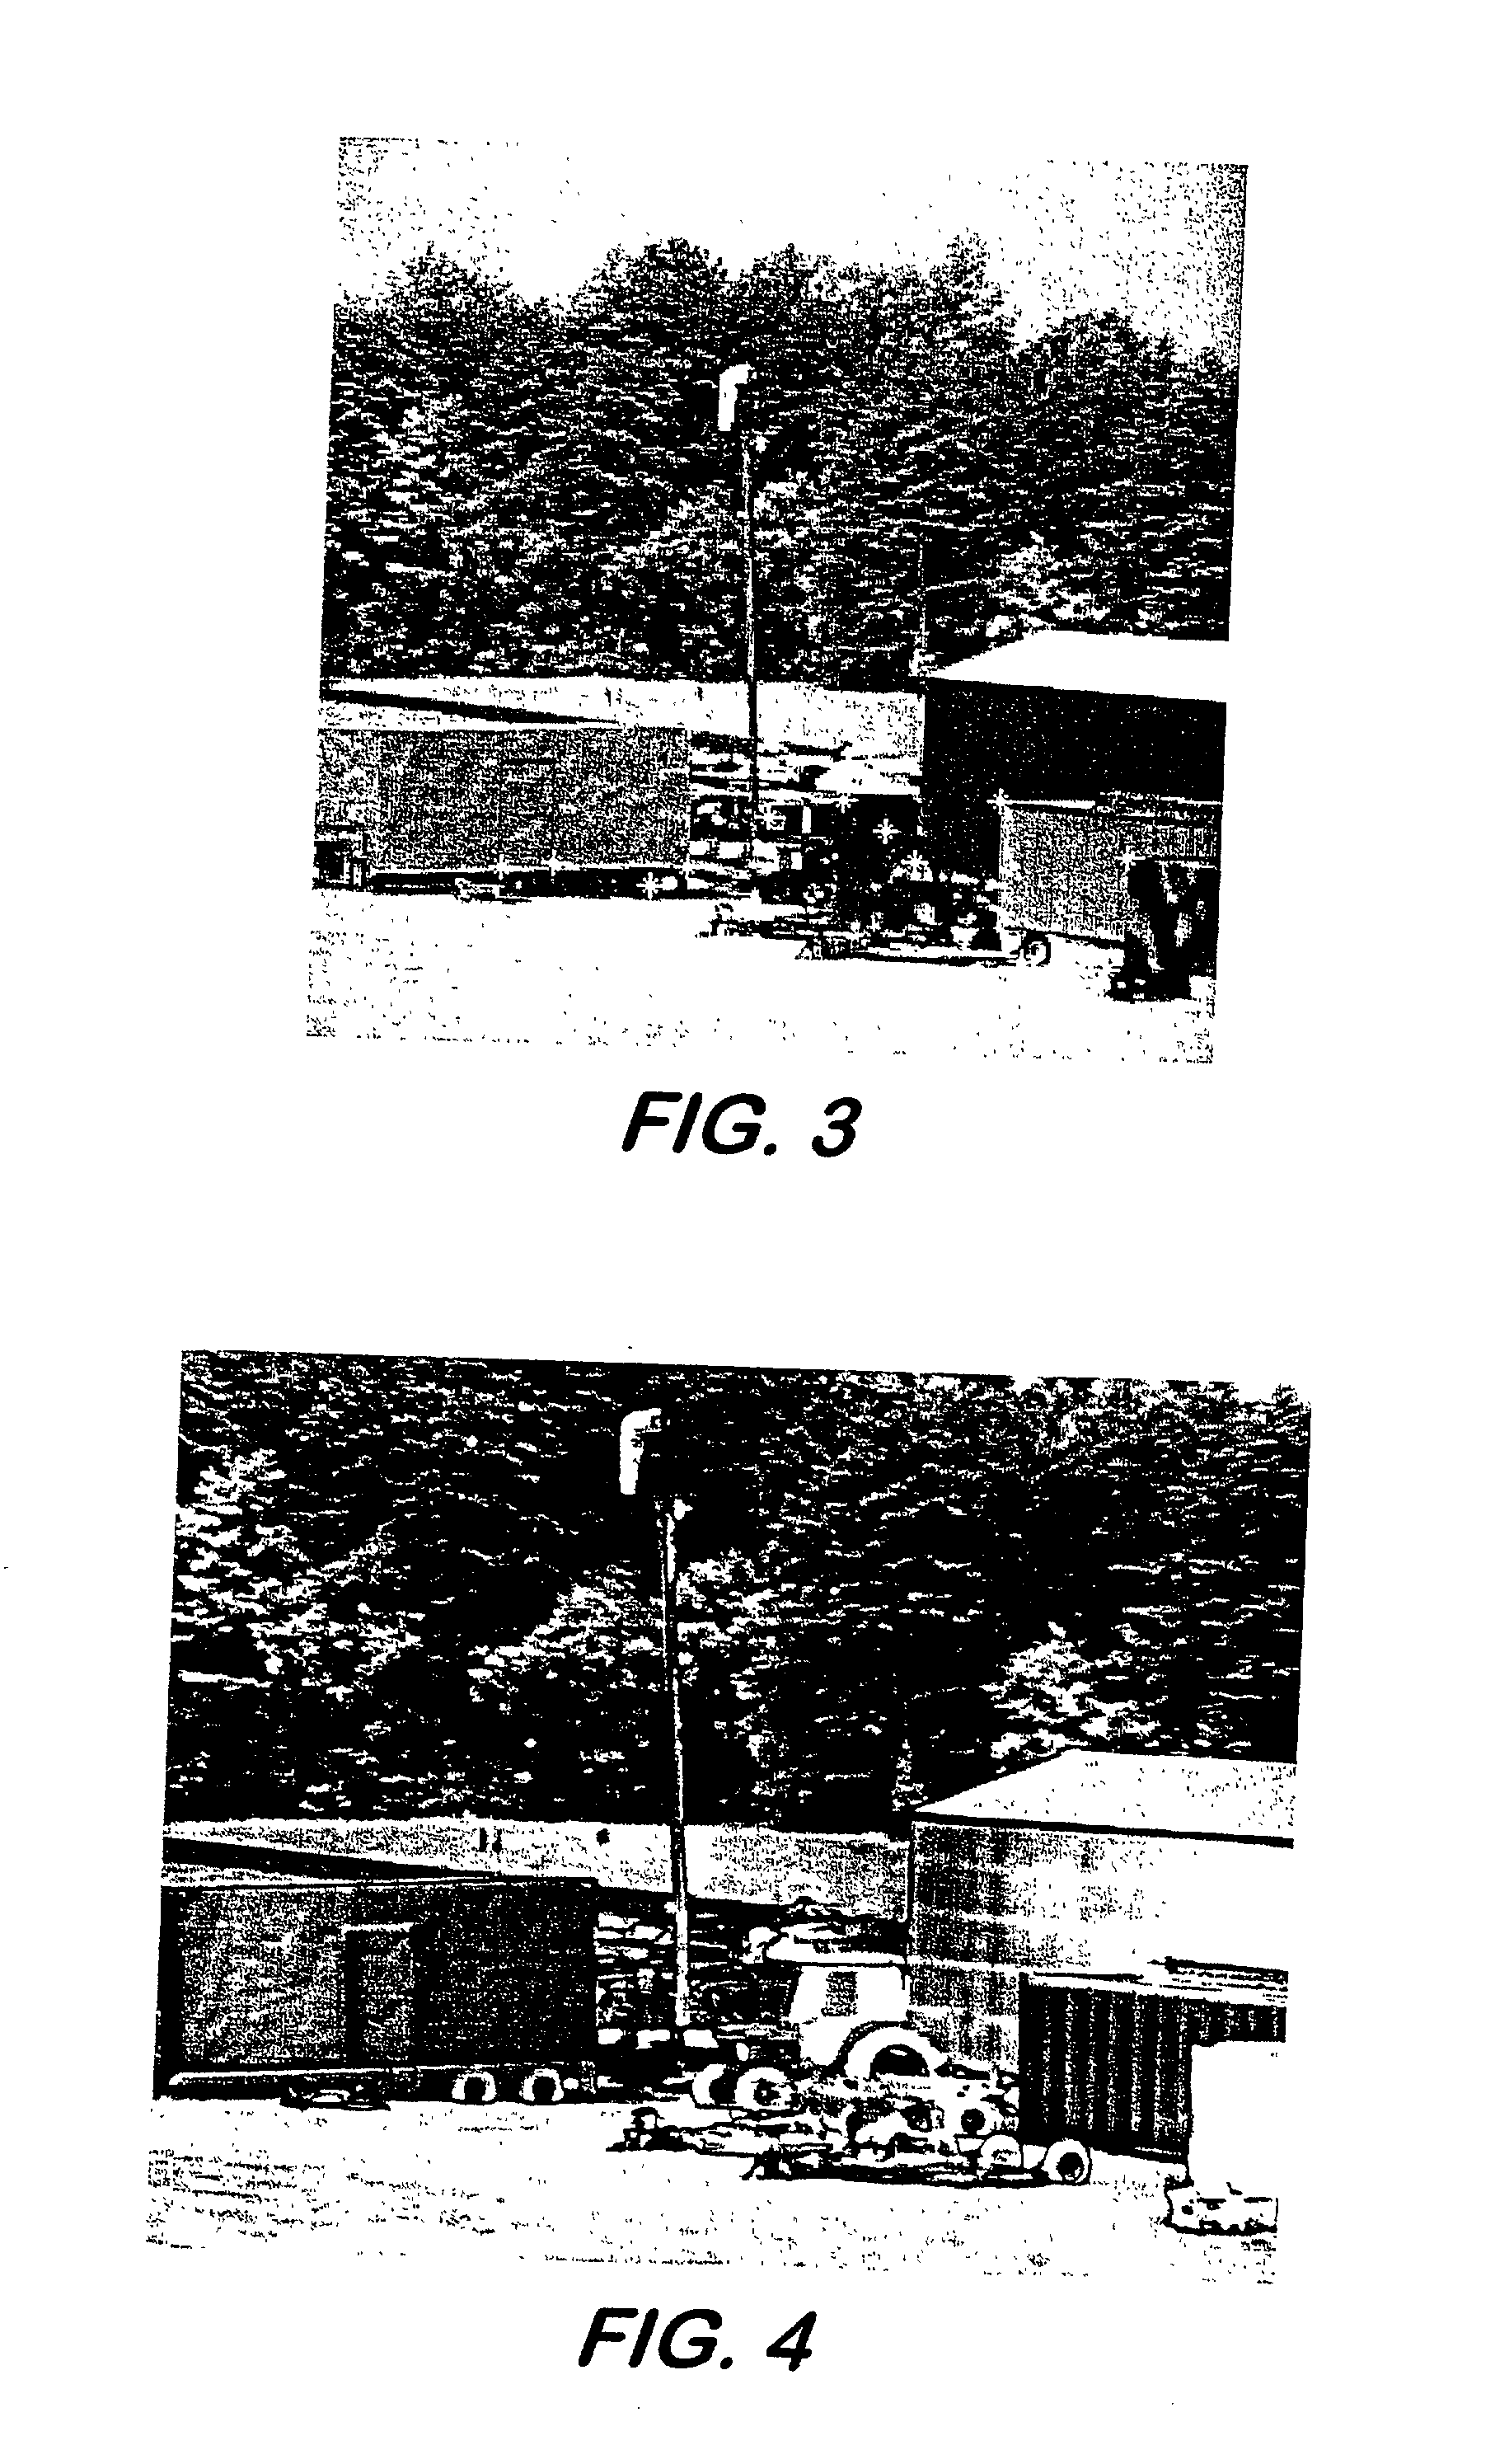 Method and apparatus for tie-point registration of disparate imaging sensors by matching optical flow